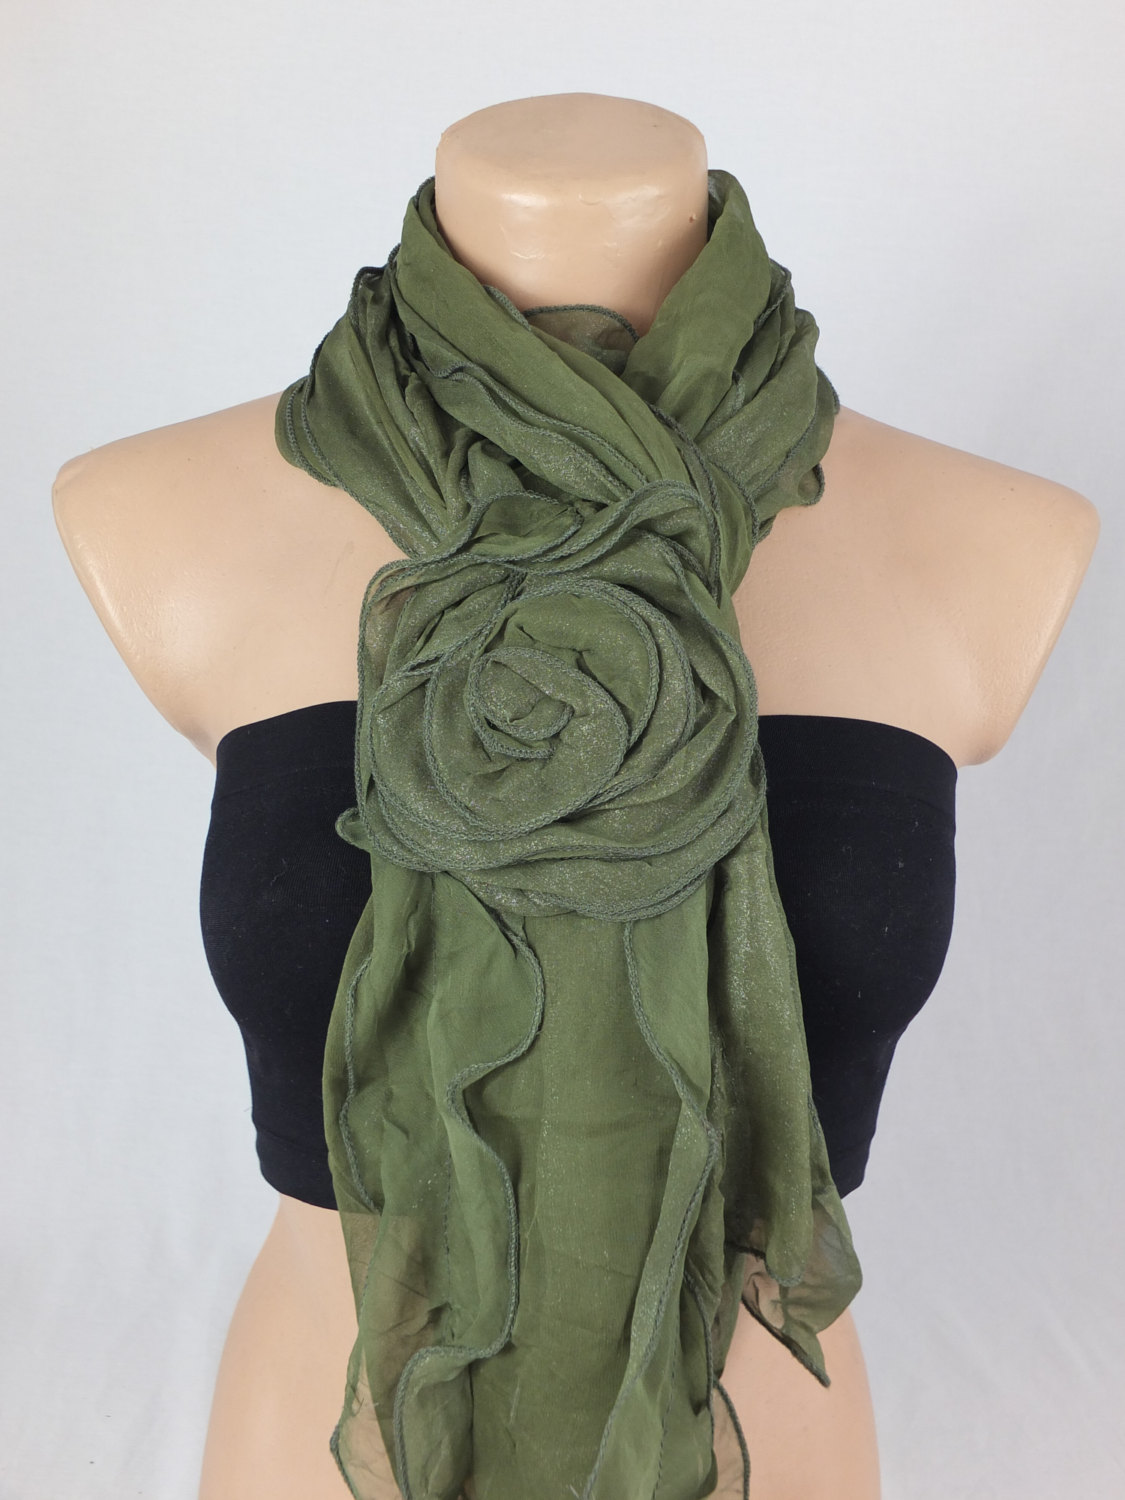 Green Scarf Shawl , 3d Rose Scarf Shawl, Ruffle Woman Scarf, Christmas Gift, Gift For Her